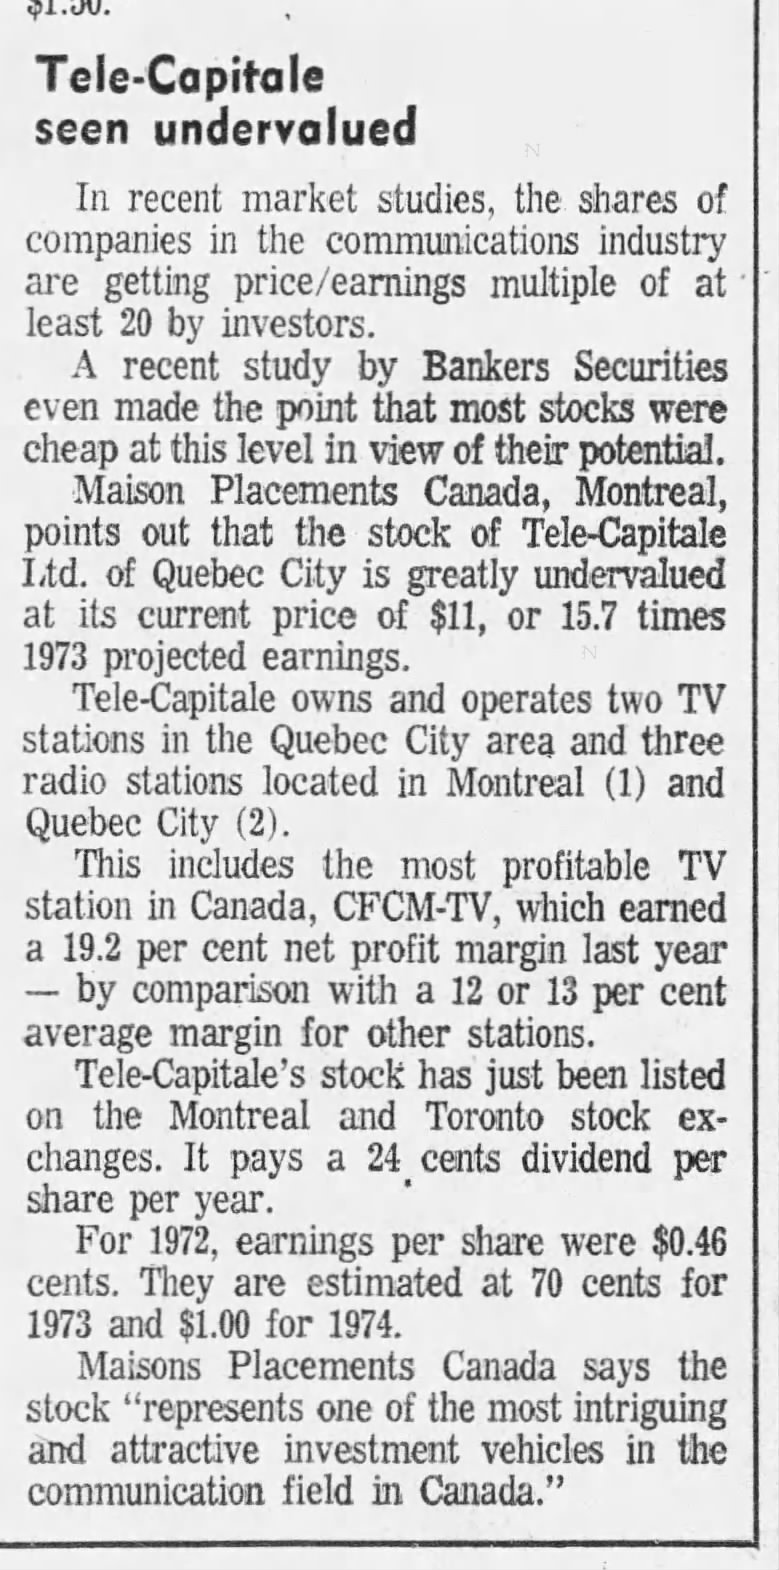 Tele-Capitale seen undervalued